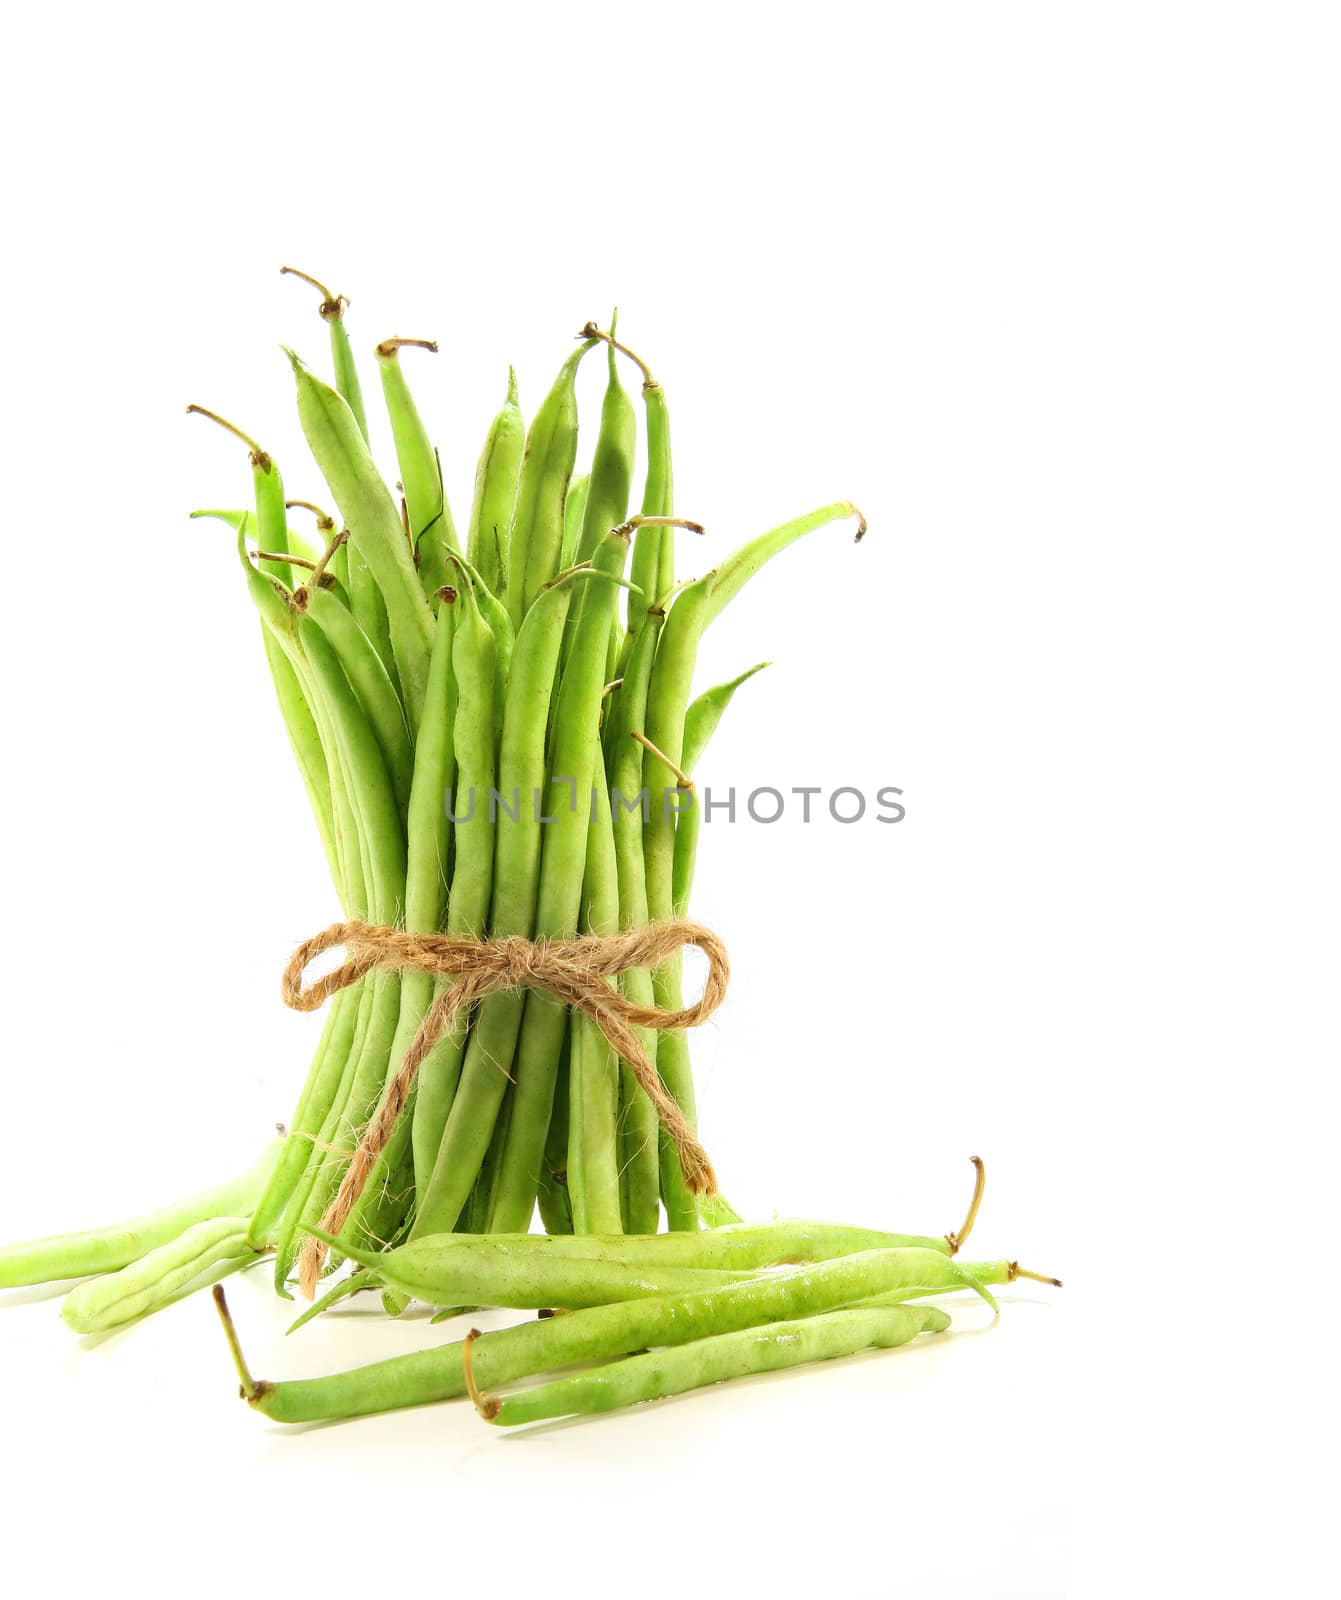 Unwashed green beans tied with cord on white by Sandralise